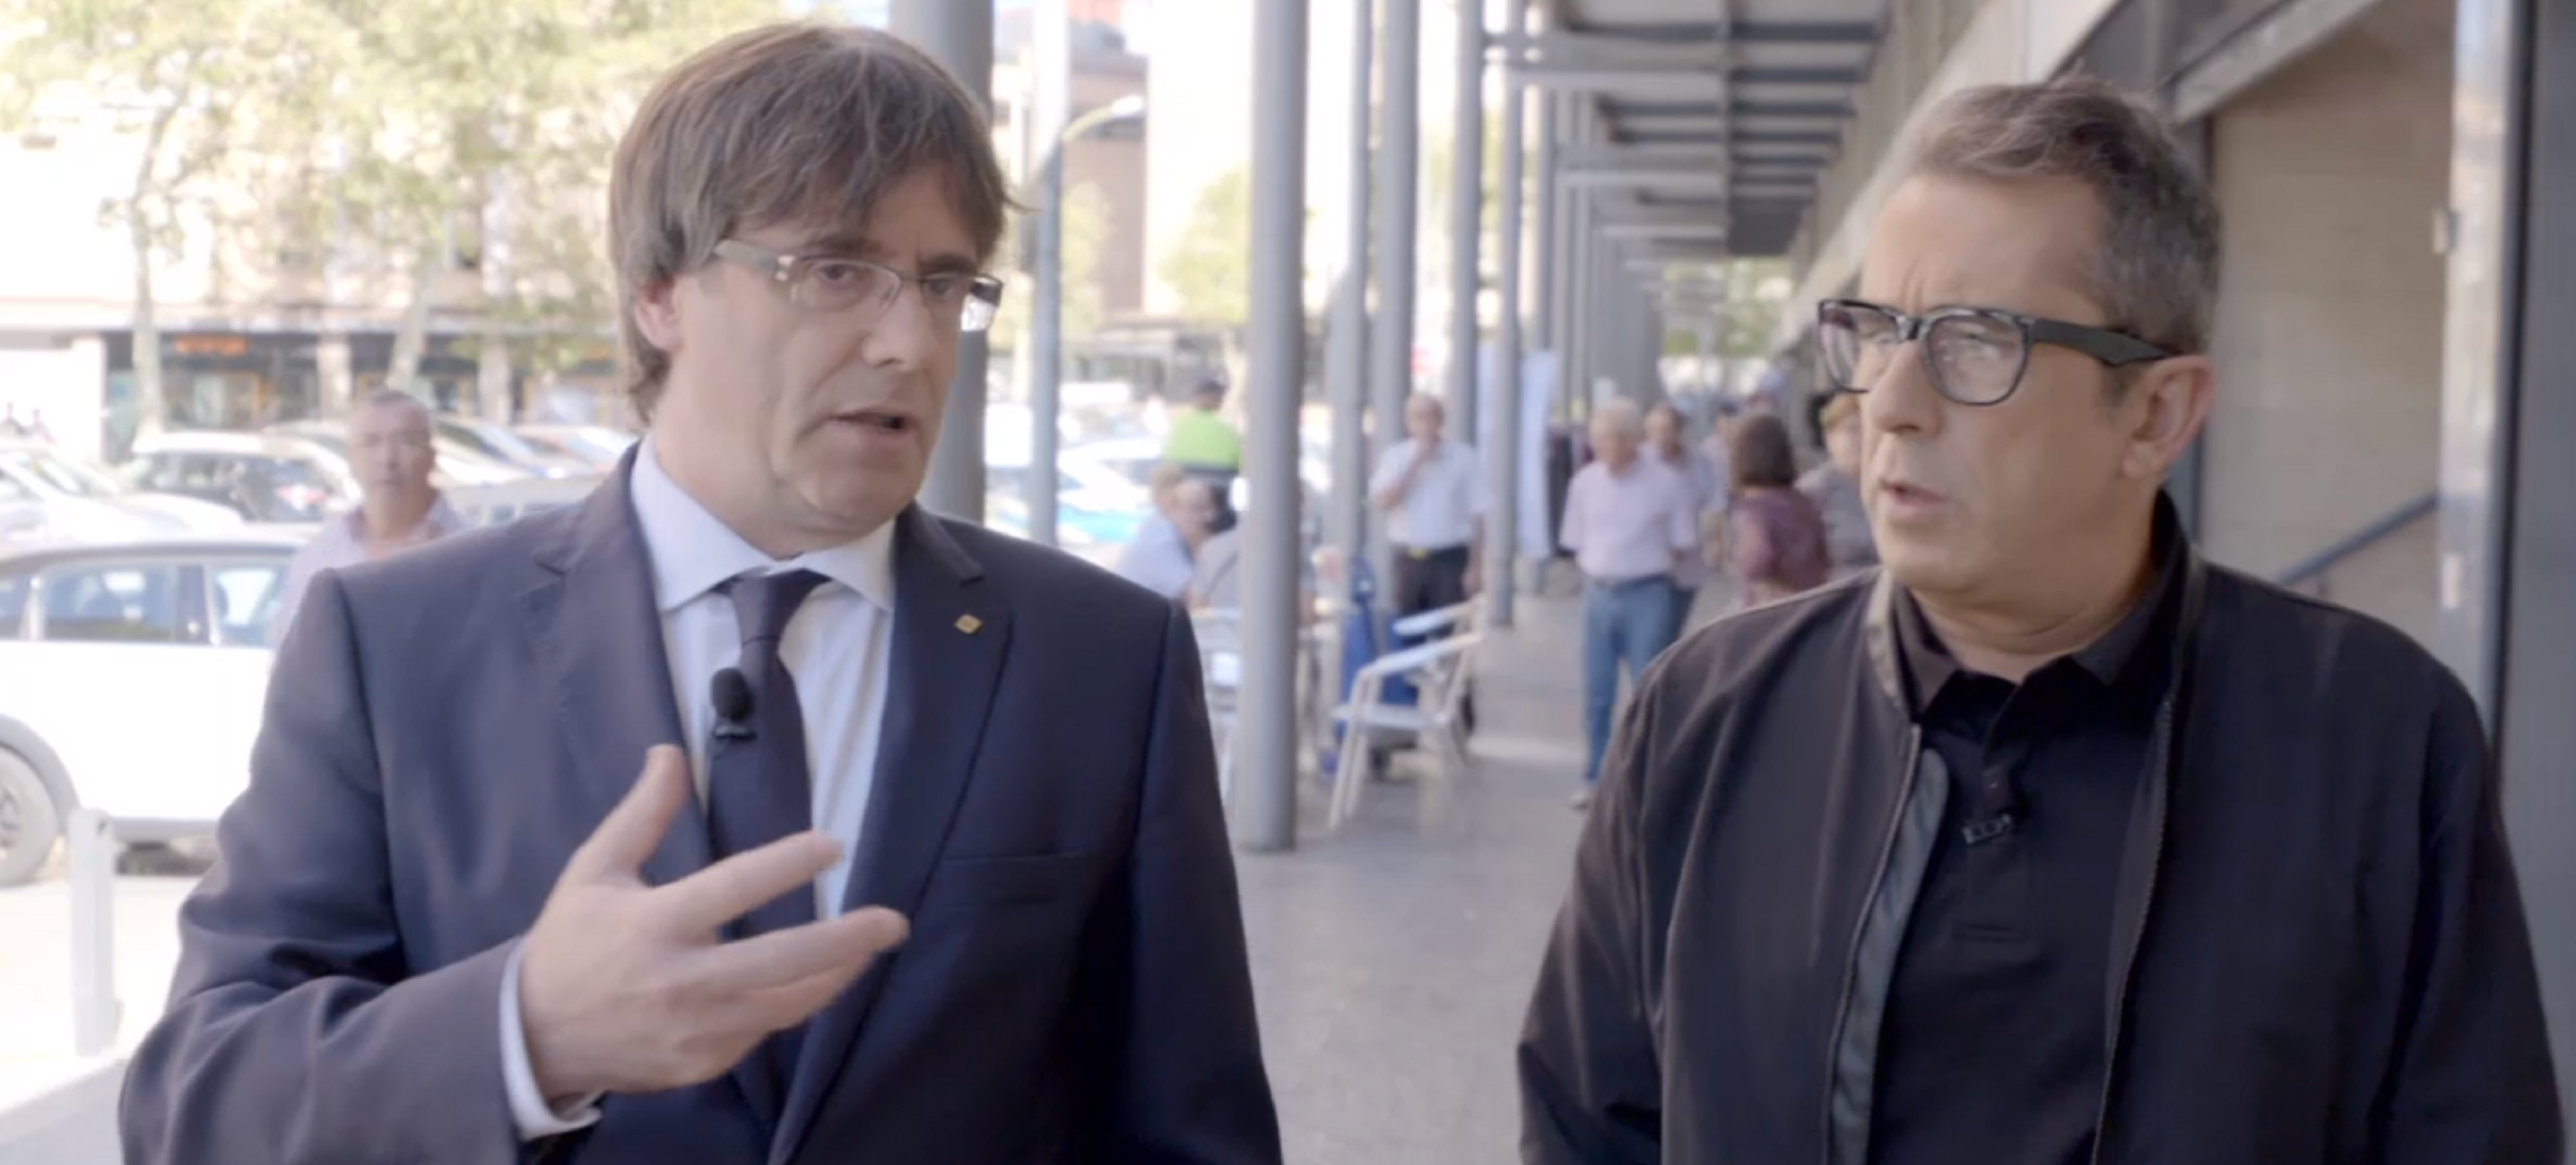 Retired Galician man takes Puigdemont to court for "attacking the honour of Spain"